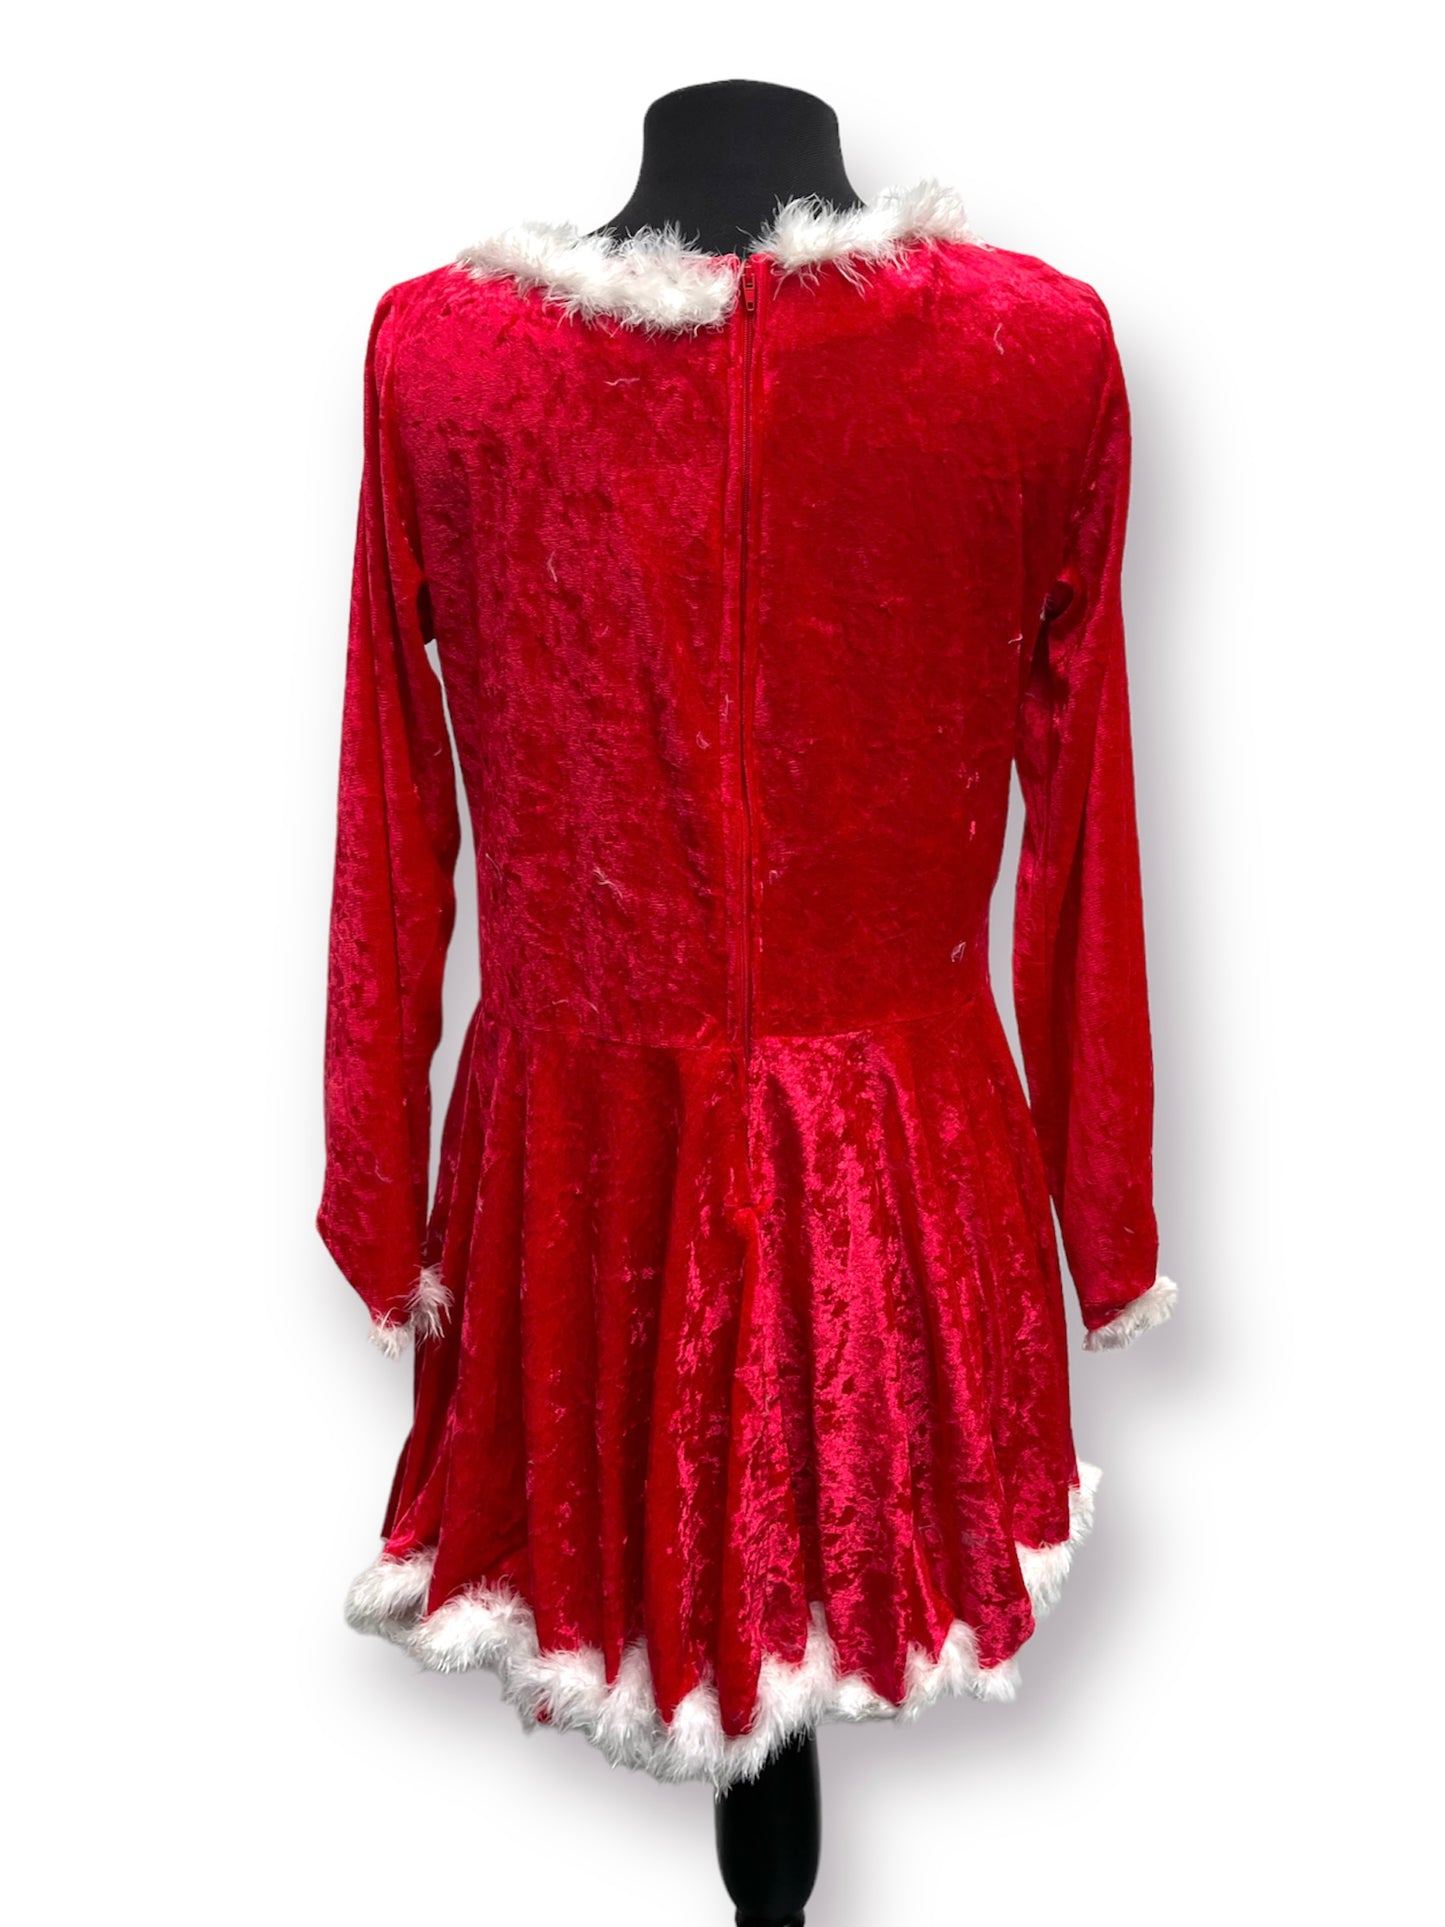 Red Mrs Claus Long Sleeved Christmas outfit Size EUR 40 UK 12 - Ex Hire Fancy Dress Costume